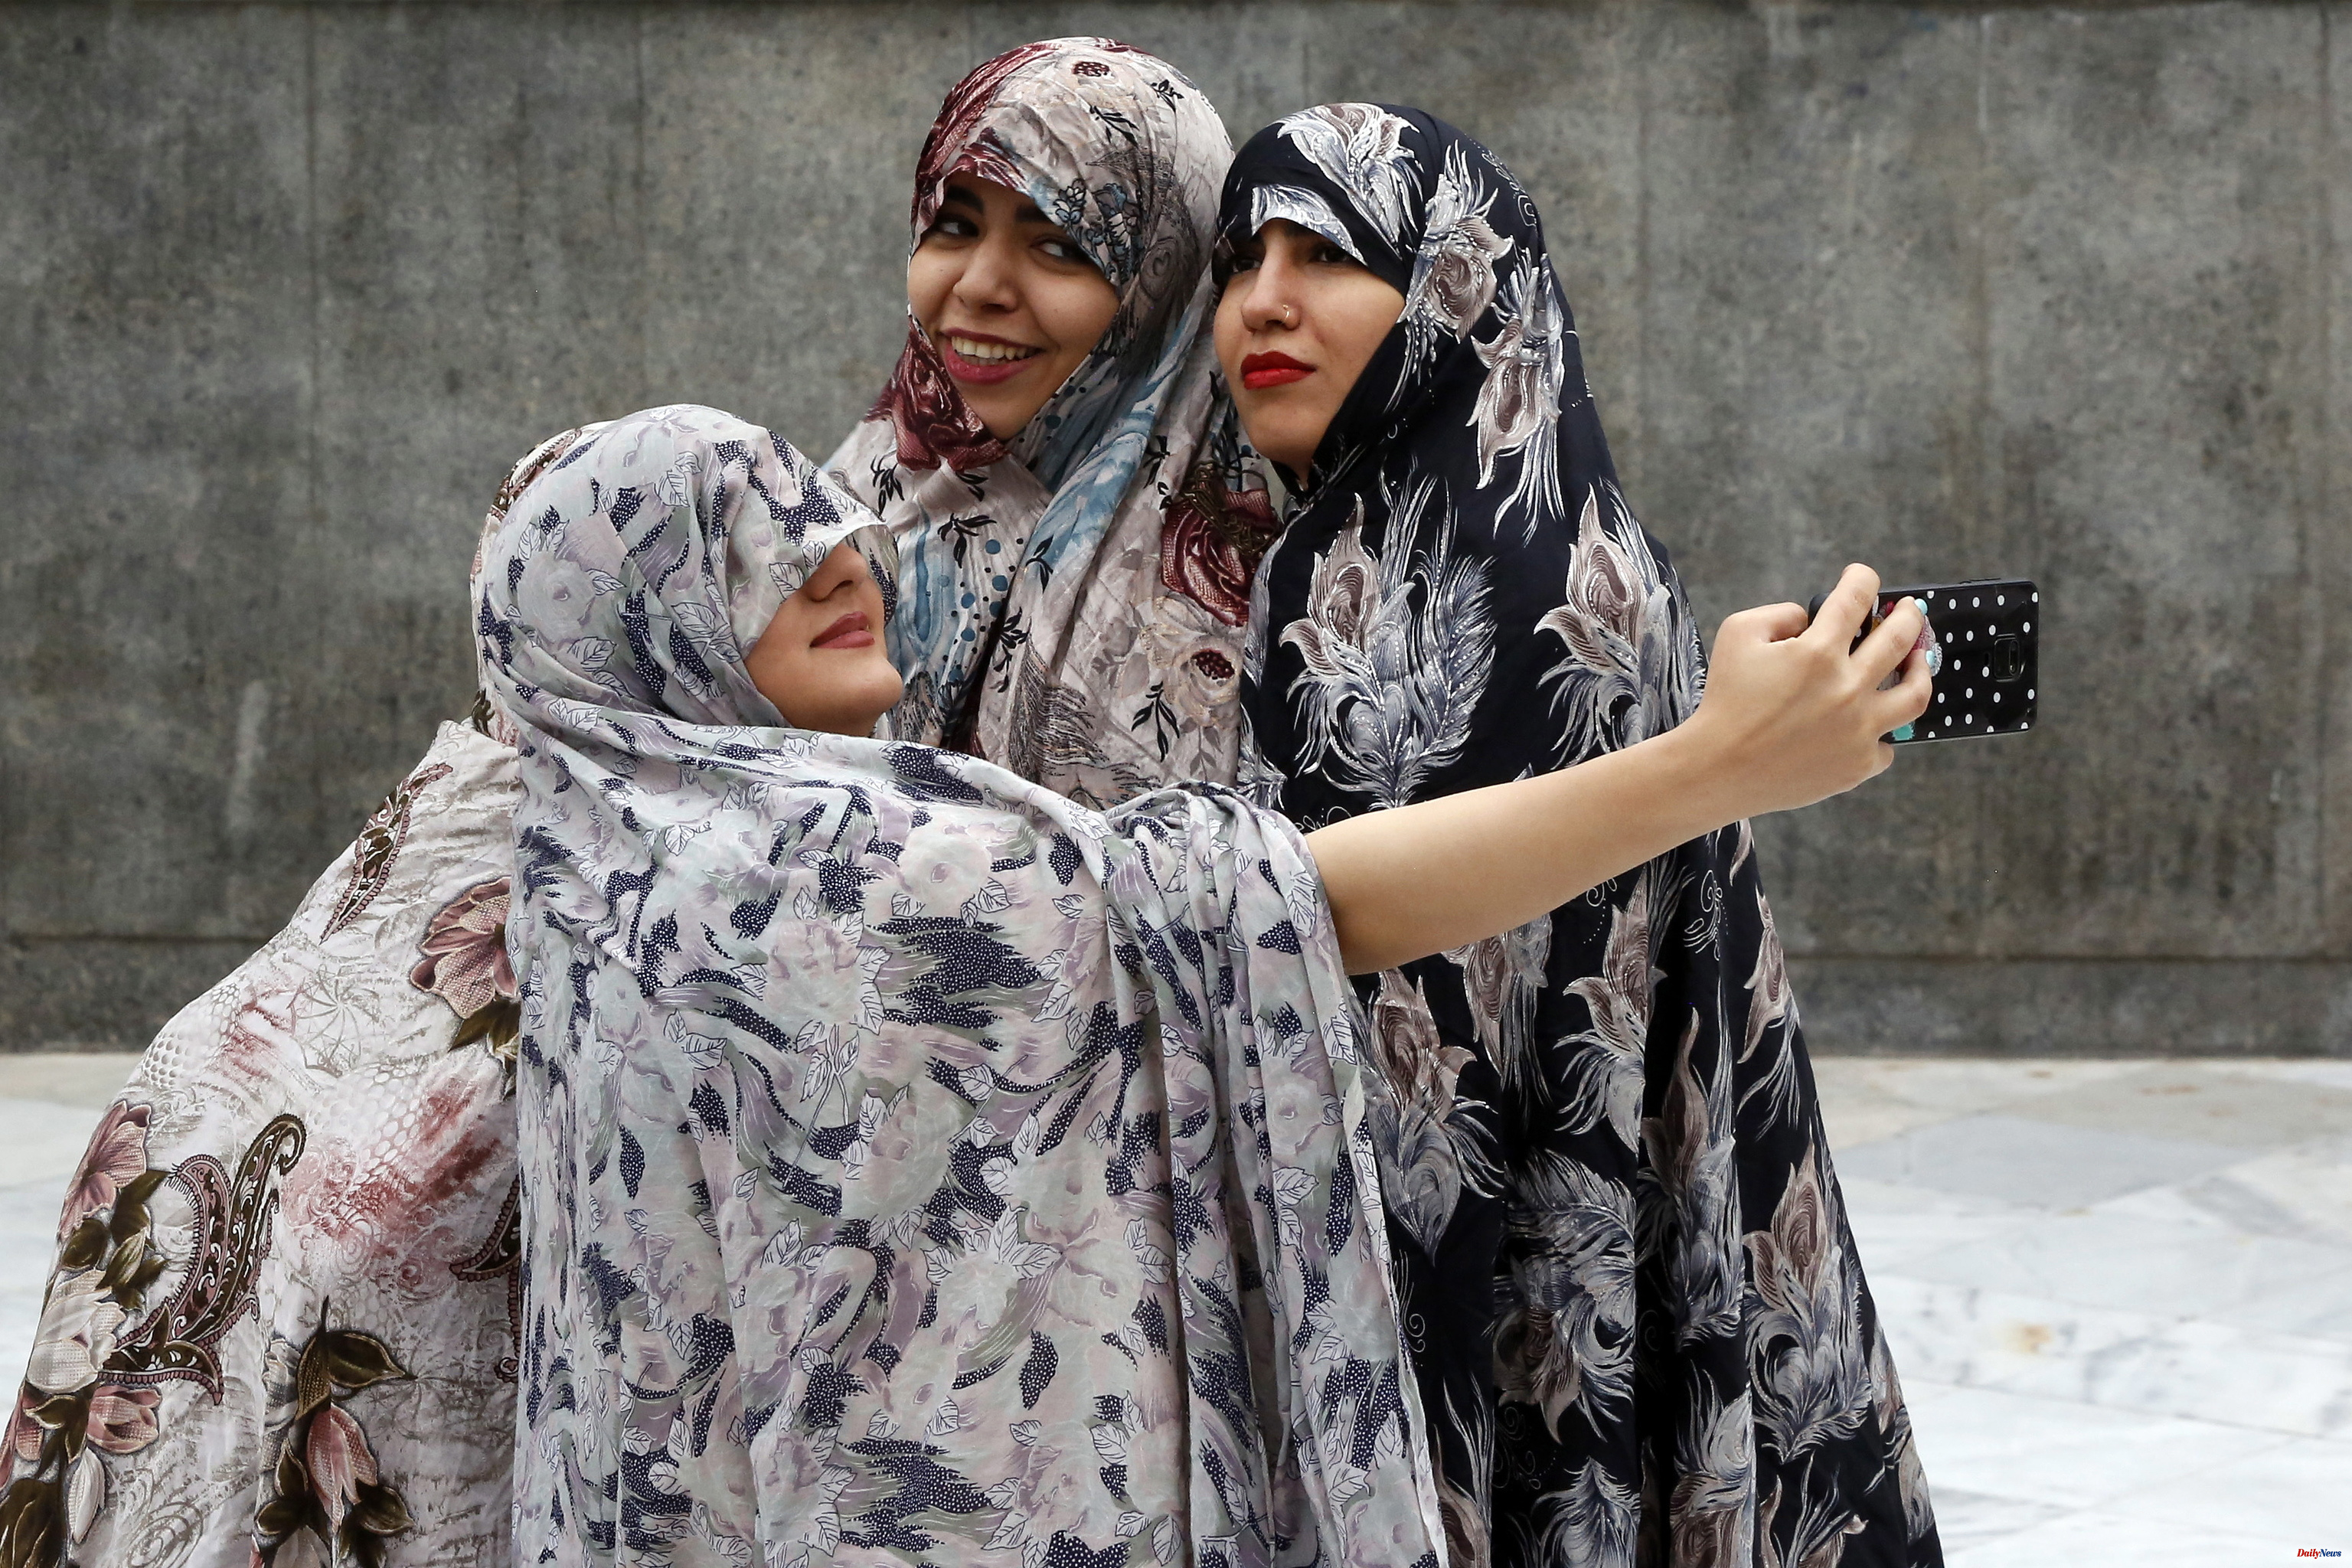 Middle East Iran orders the arrest of two women who did not wear headscarves in a shop